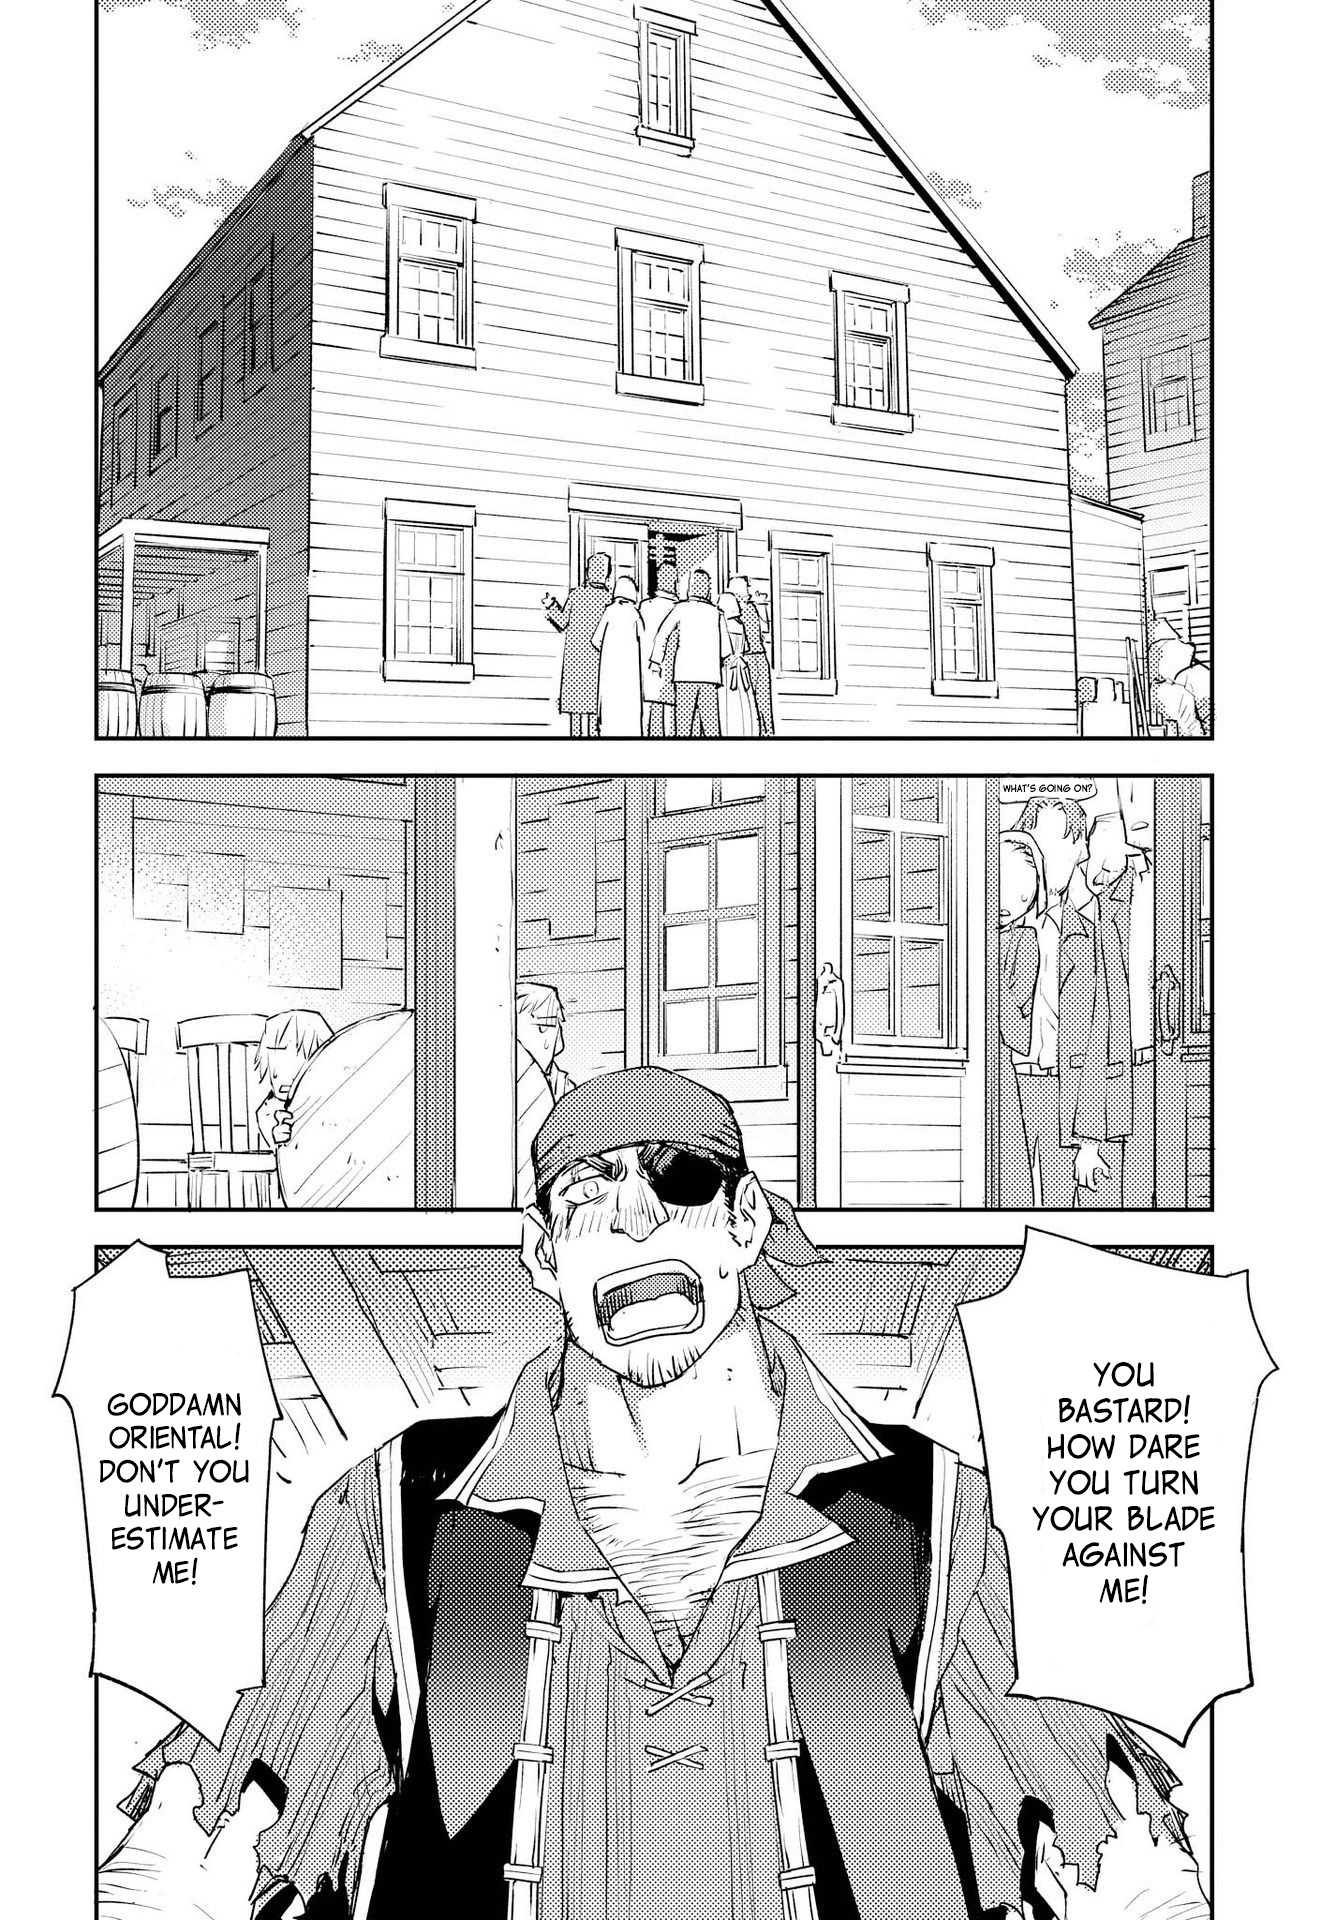 Fate/grand Order: Epic Of Remnant - Subspecies Singularity Iv: Taboo Advent Salem: Salem Of Heresy - 5 page 20